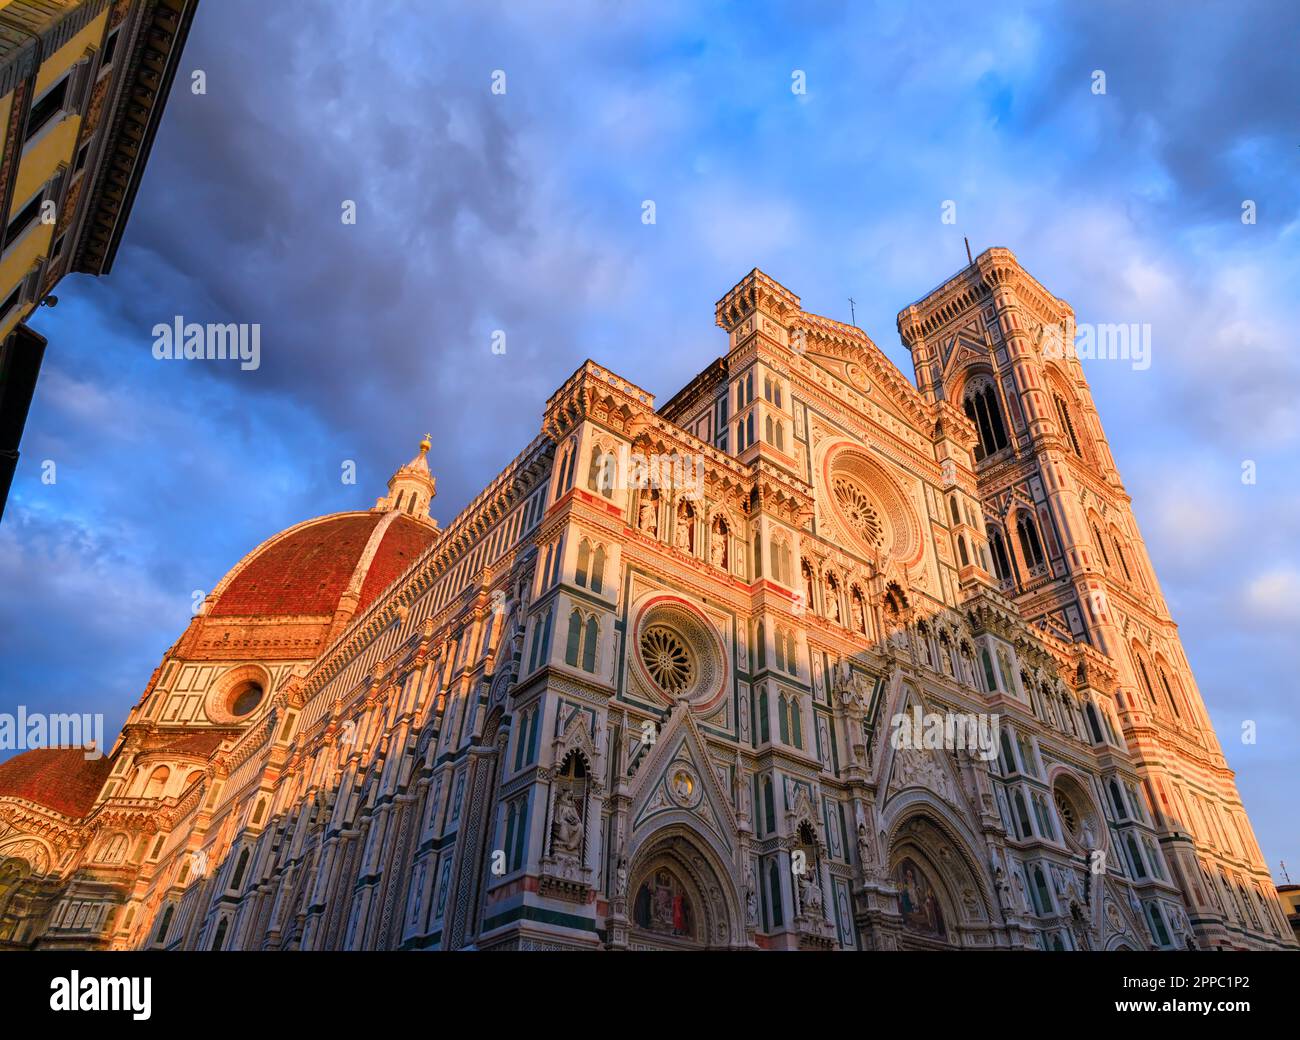 Cathedral of Santa Maria del Fiore in Florence at sunset, Italy. Stock Photo